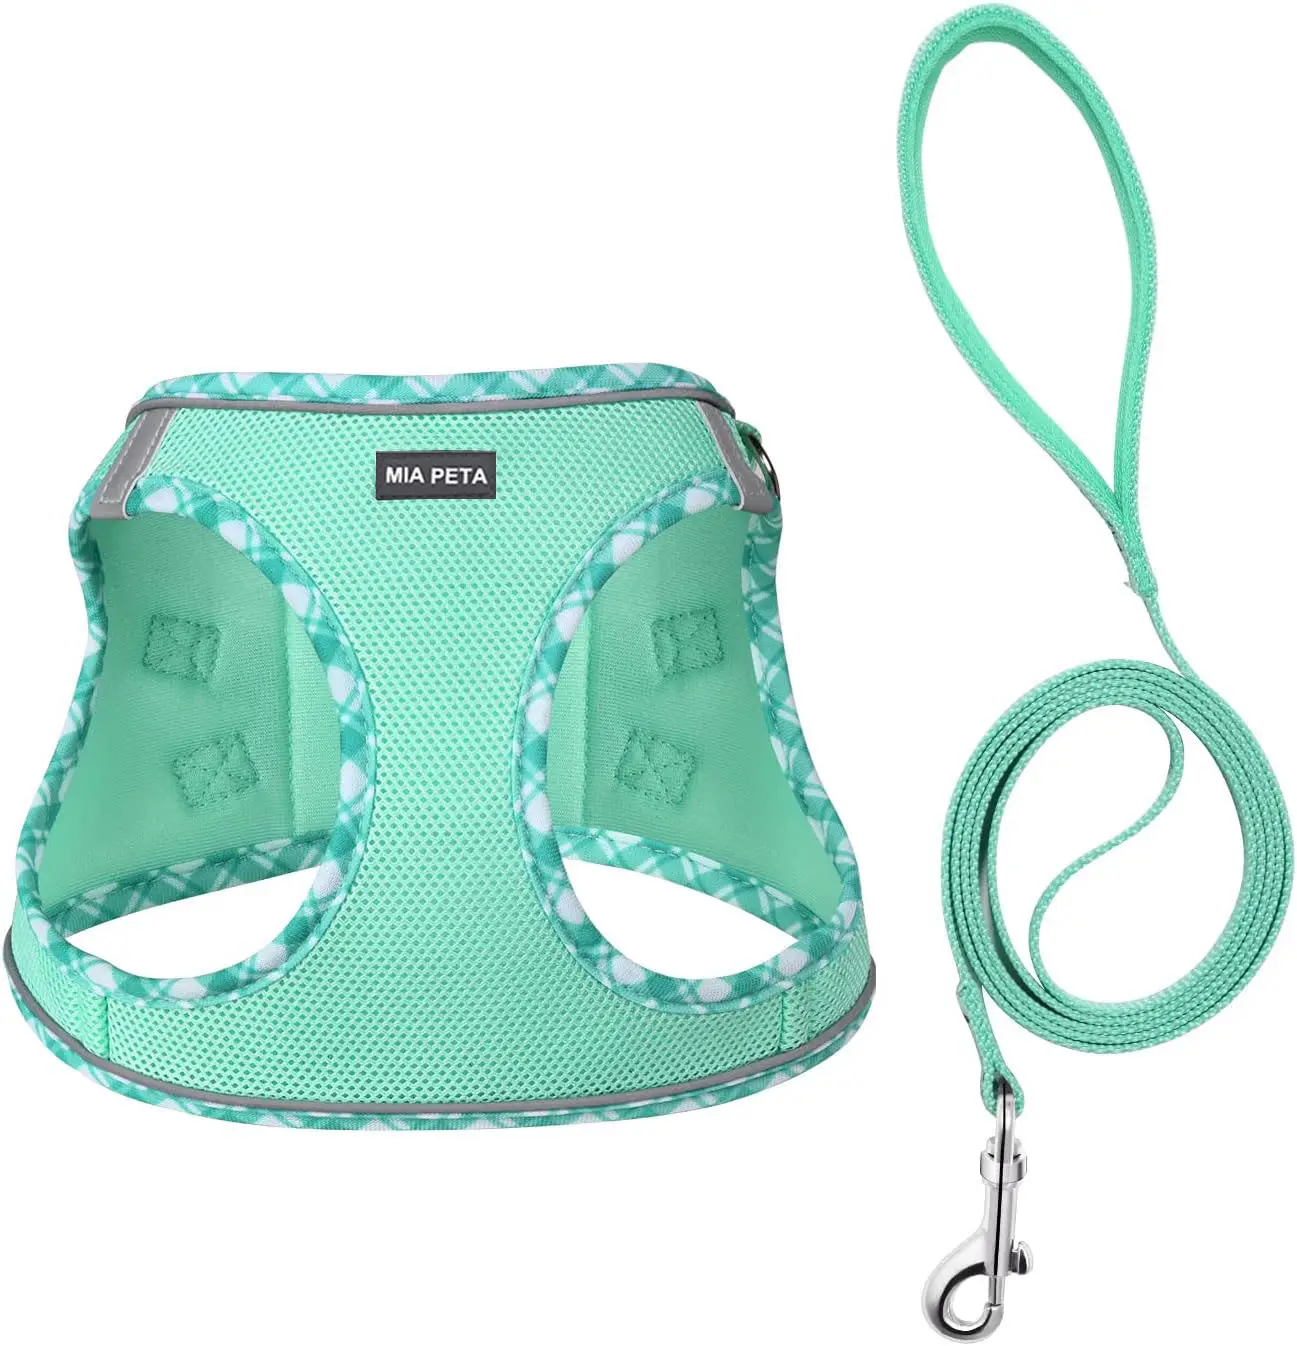 No Pull Adjustable Reflective Puppy AIR MESH Harness leash set with Padded Vest for Extra-Small/Small Medium Large Dogs and Cats